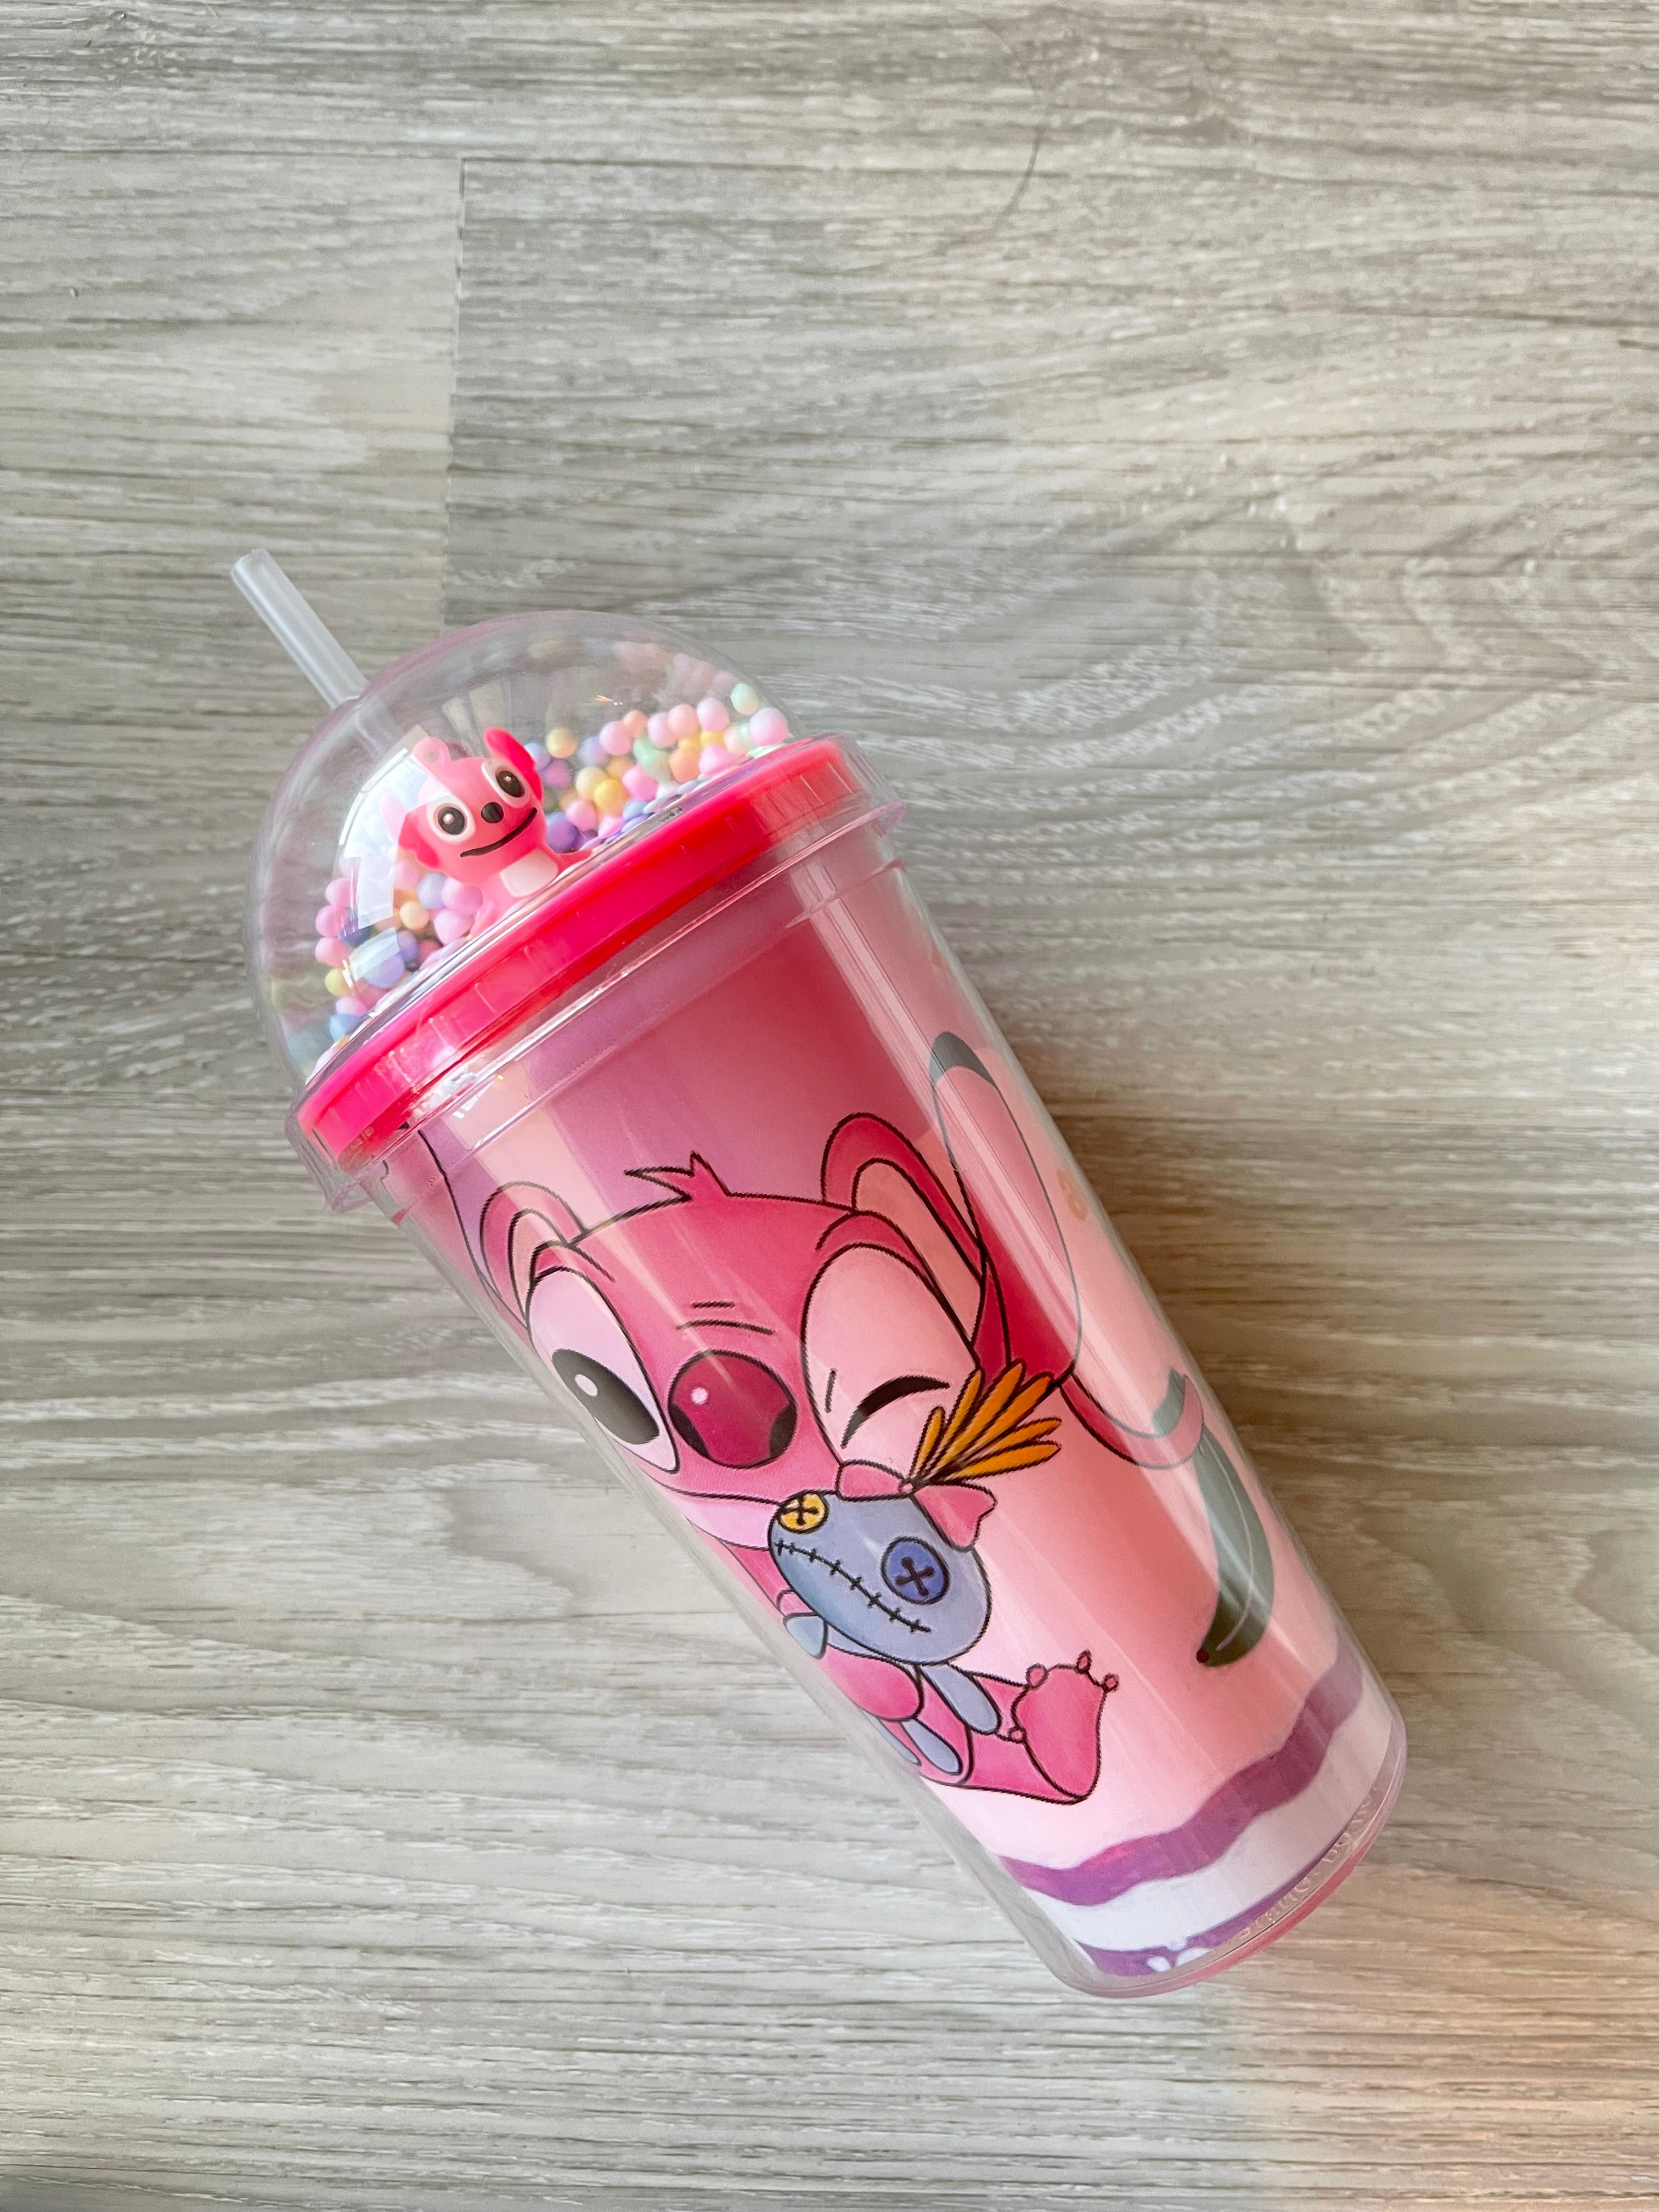 Angel lilo cup with straw💕